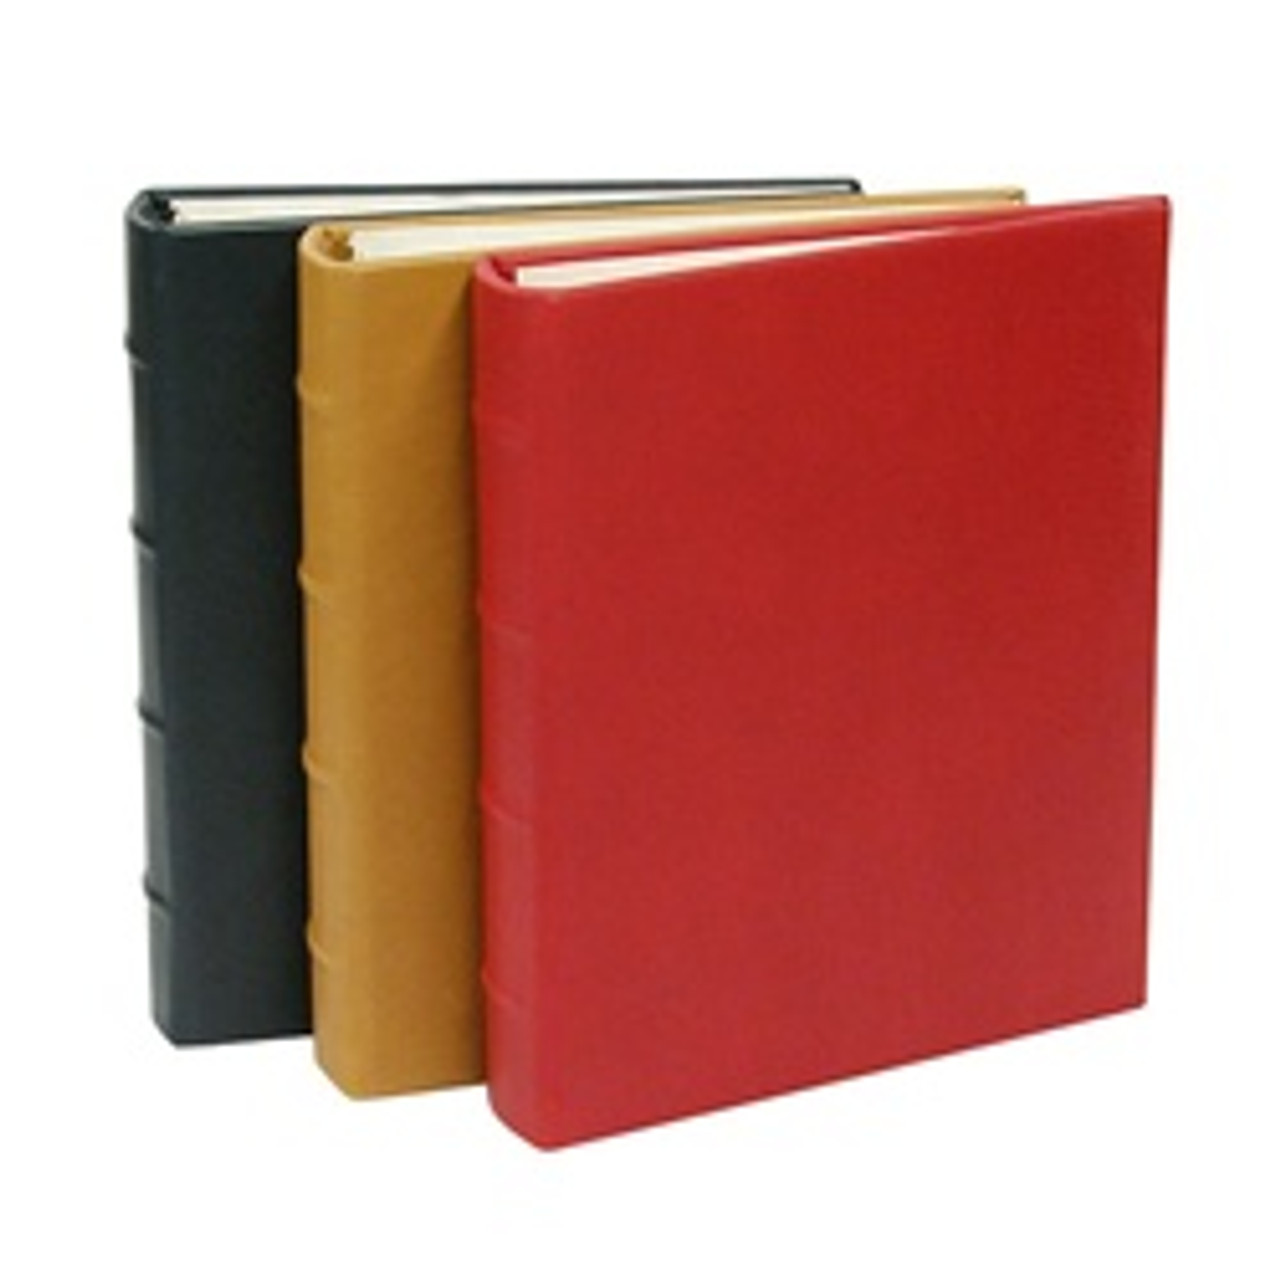 SALE Large Size, Soft Leather Photo Albums Leather Albums With